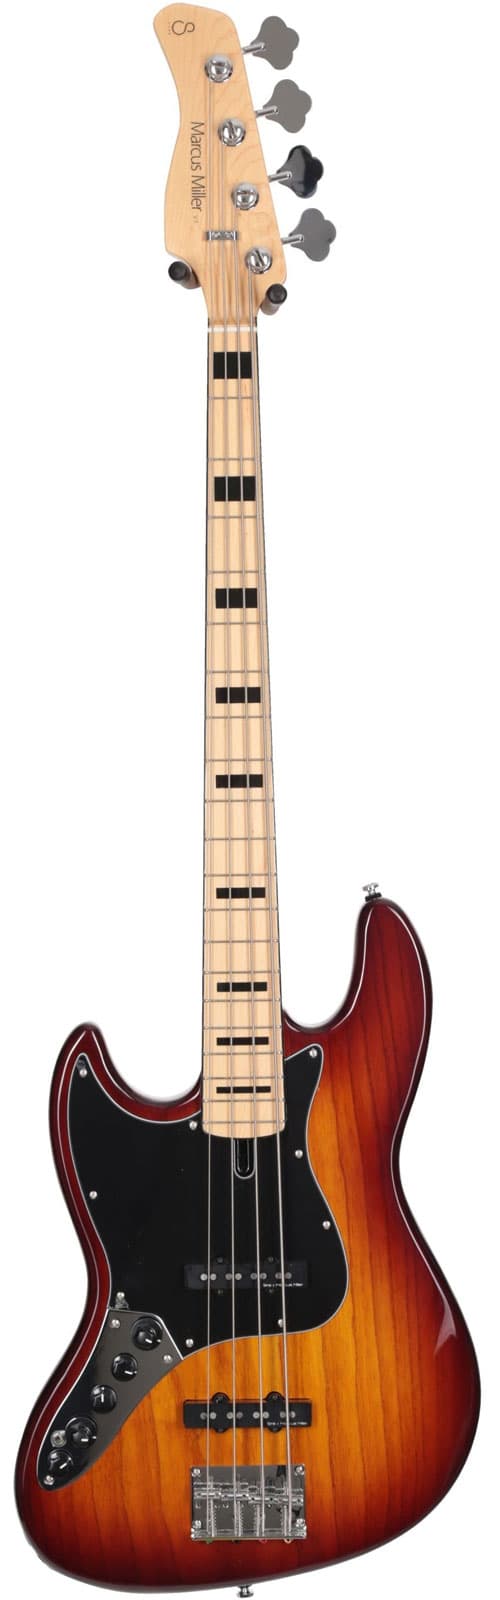 SIRE MARCUS MILLER V7 VINTAGE S.ASH-4 LH TS MN